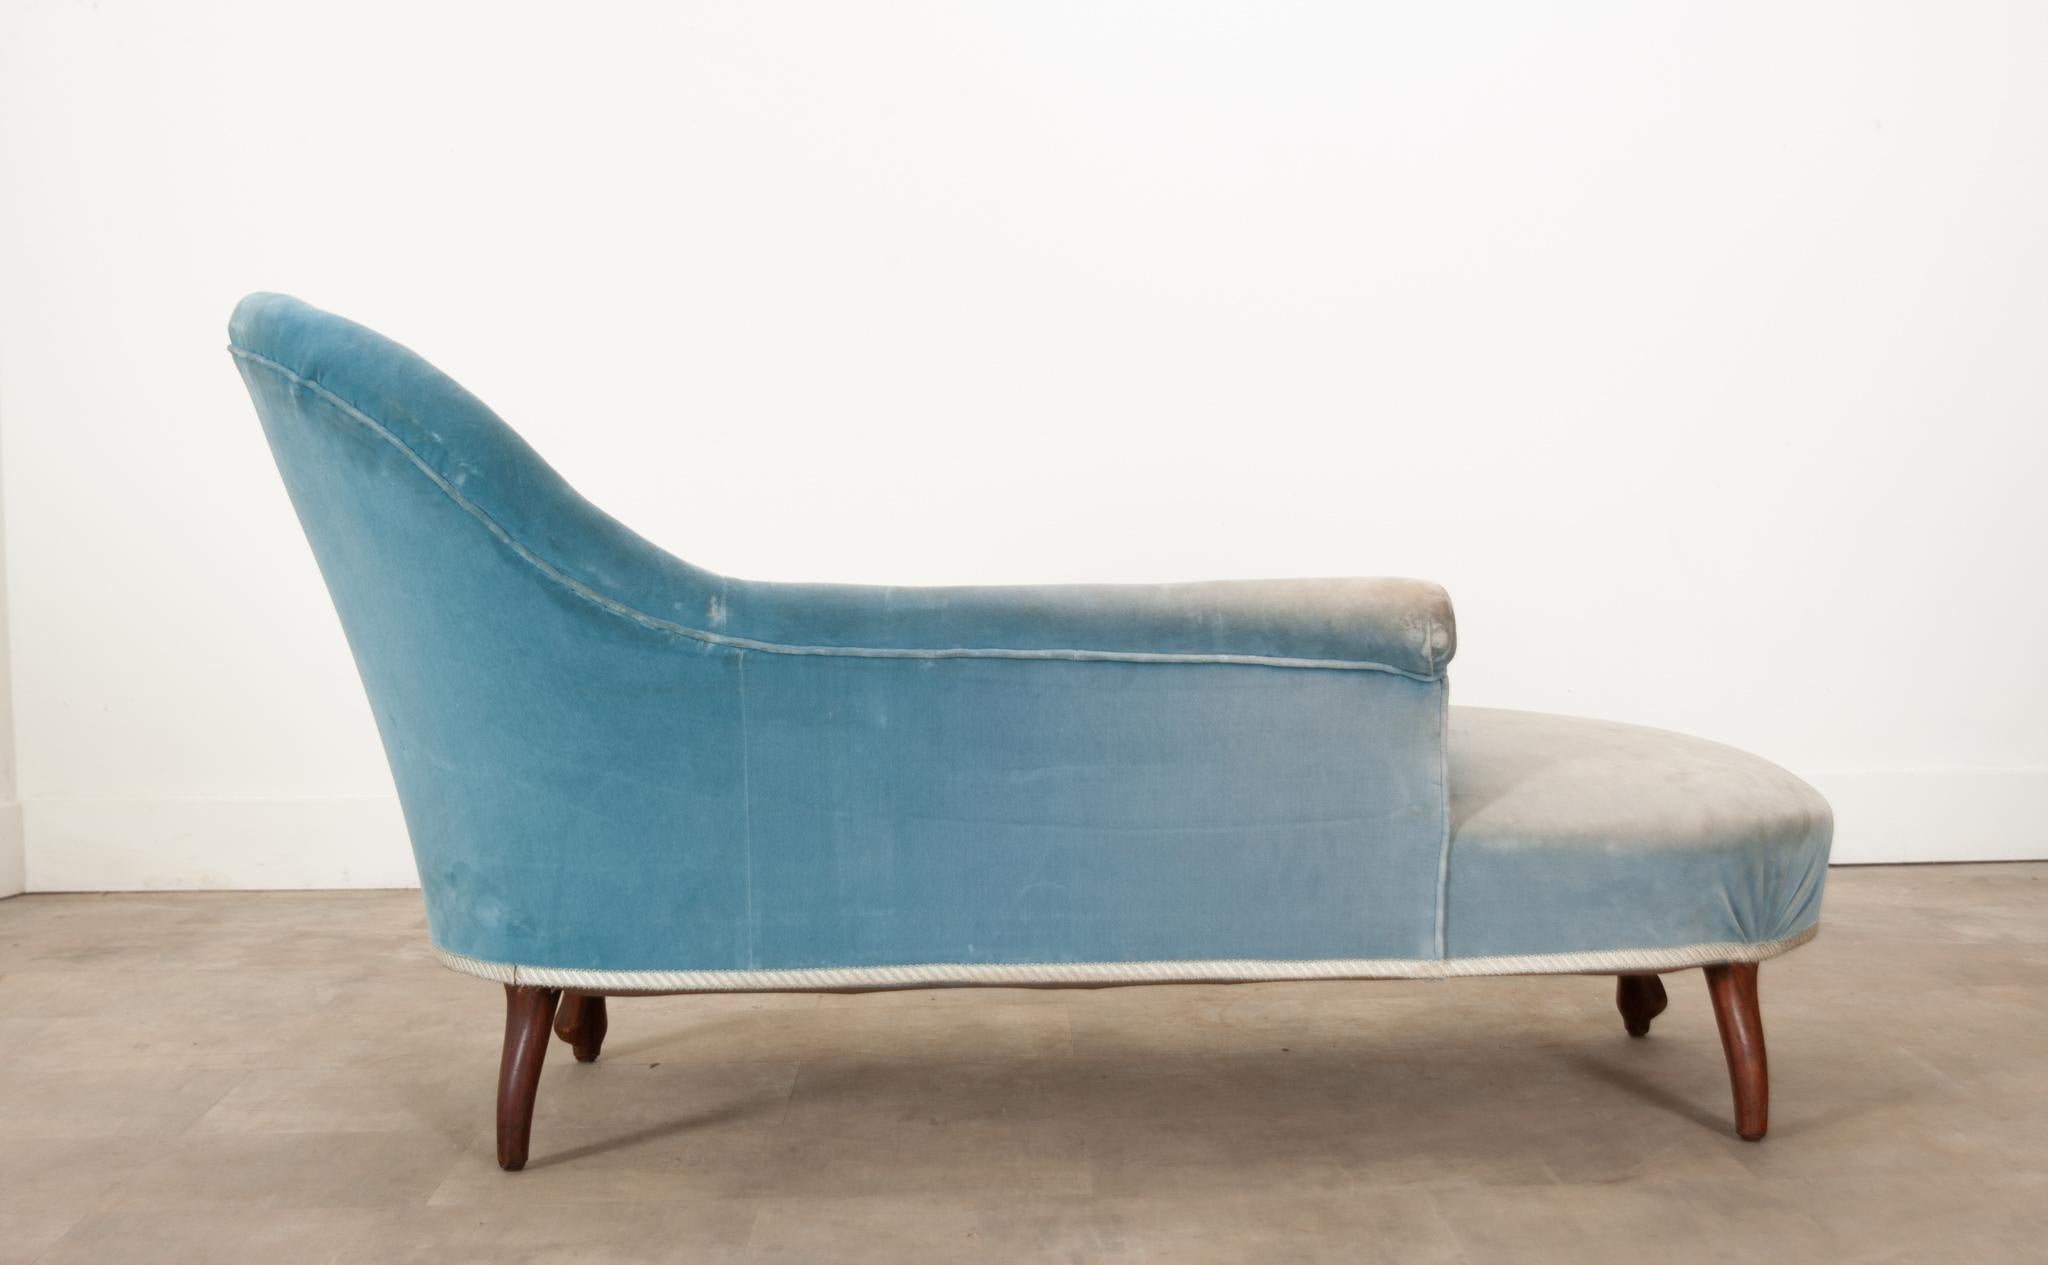 20th Century French Vintage Meridienne or Chaise Longue